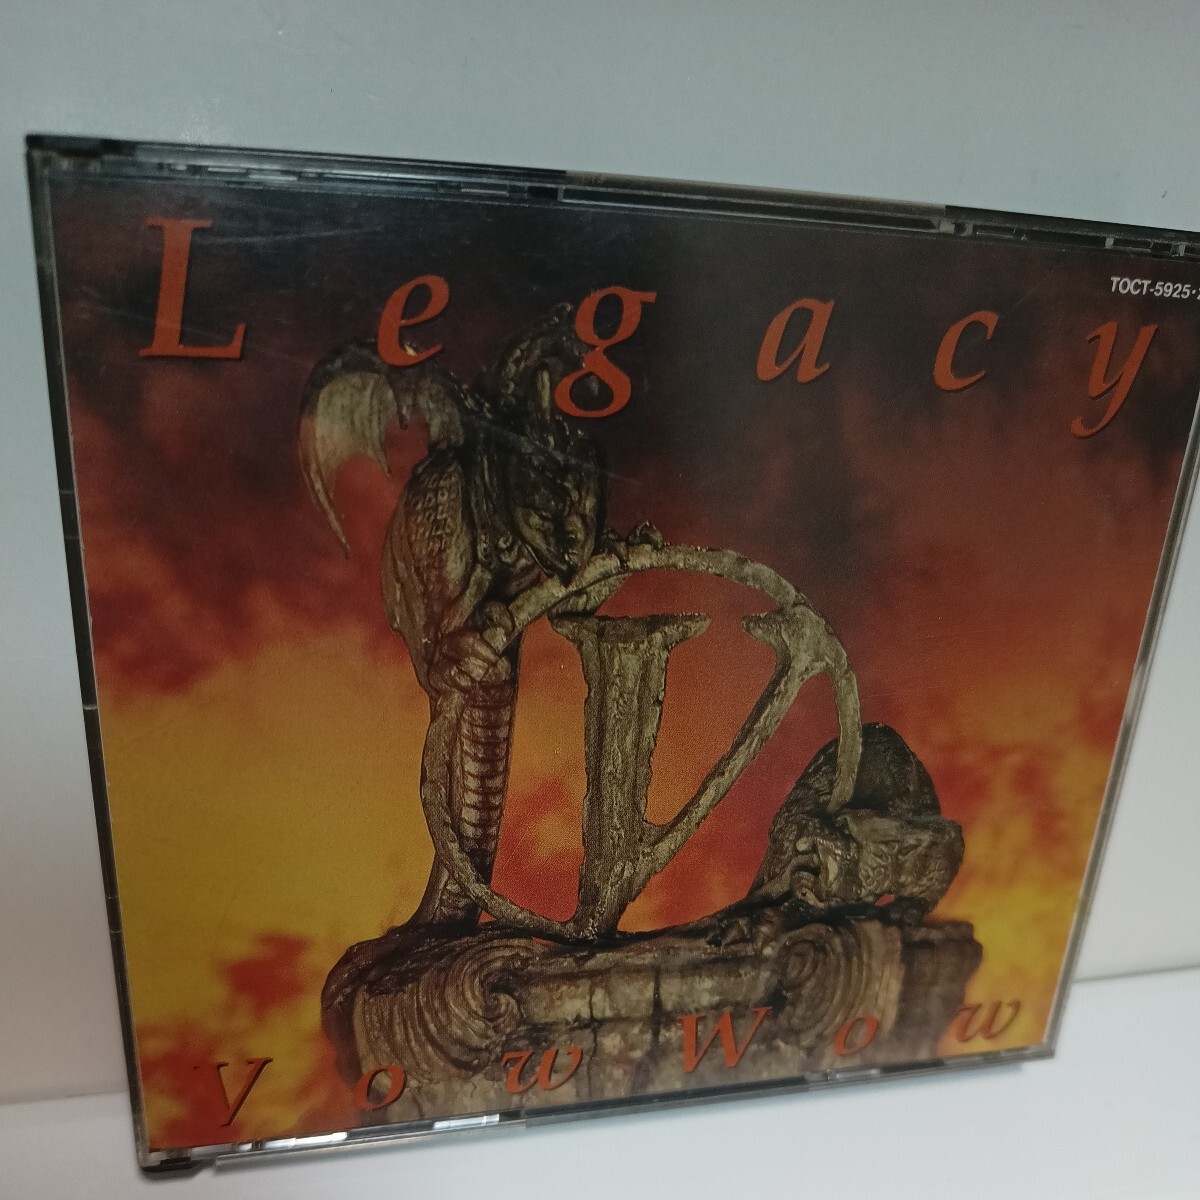 VOW WOW「LEGACY」2CDの画像1